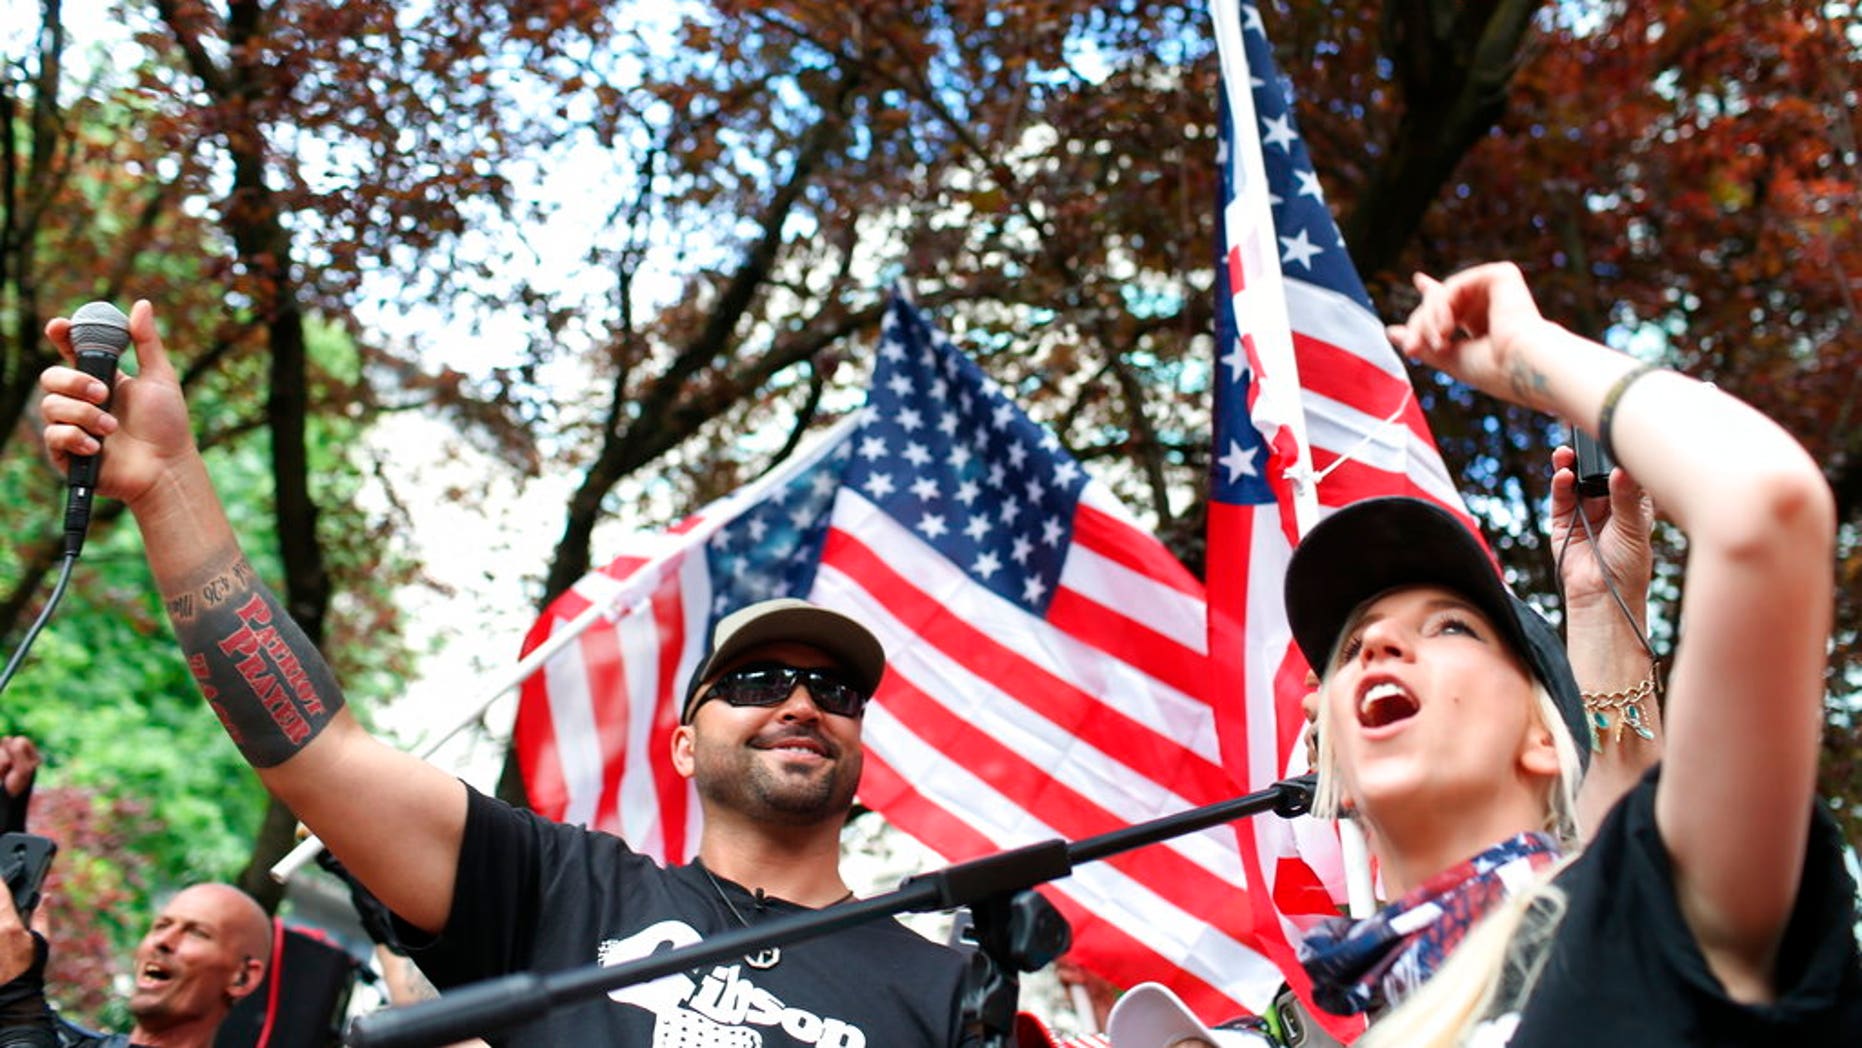 Joey Gibson, left, leader of Patriot Prayer, leads a previous rally in Portland, Oregon on June 30, 2018.